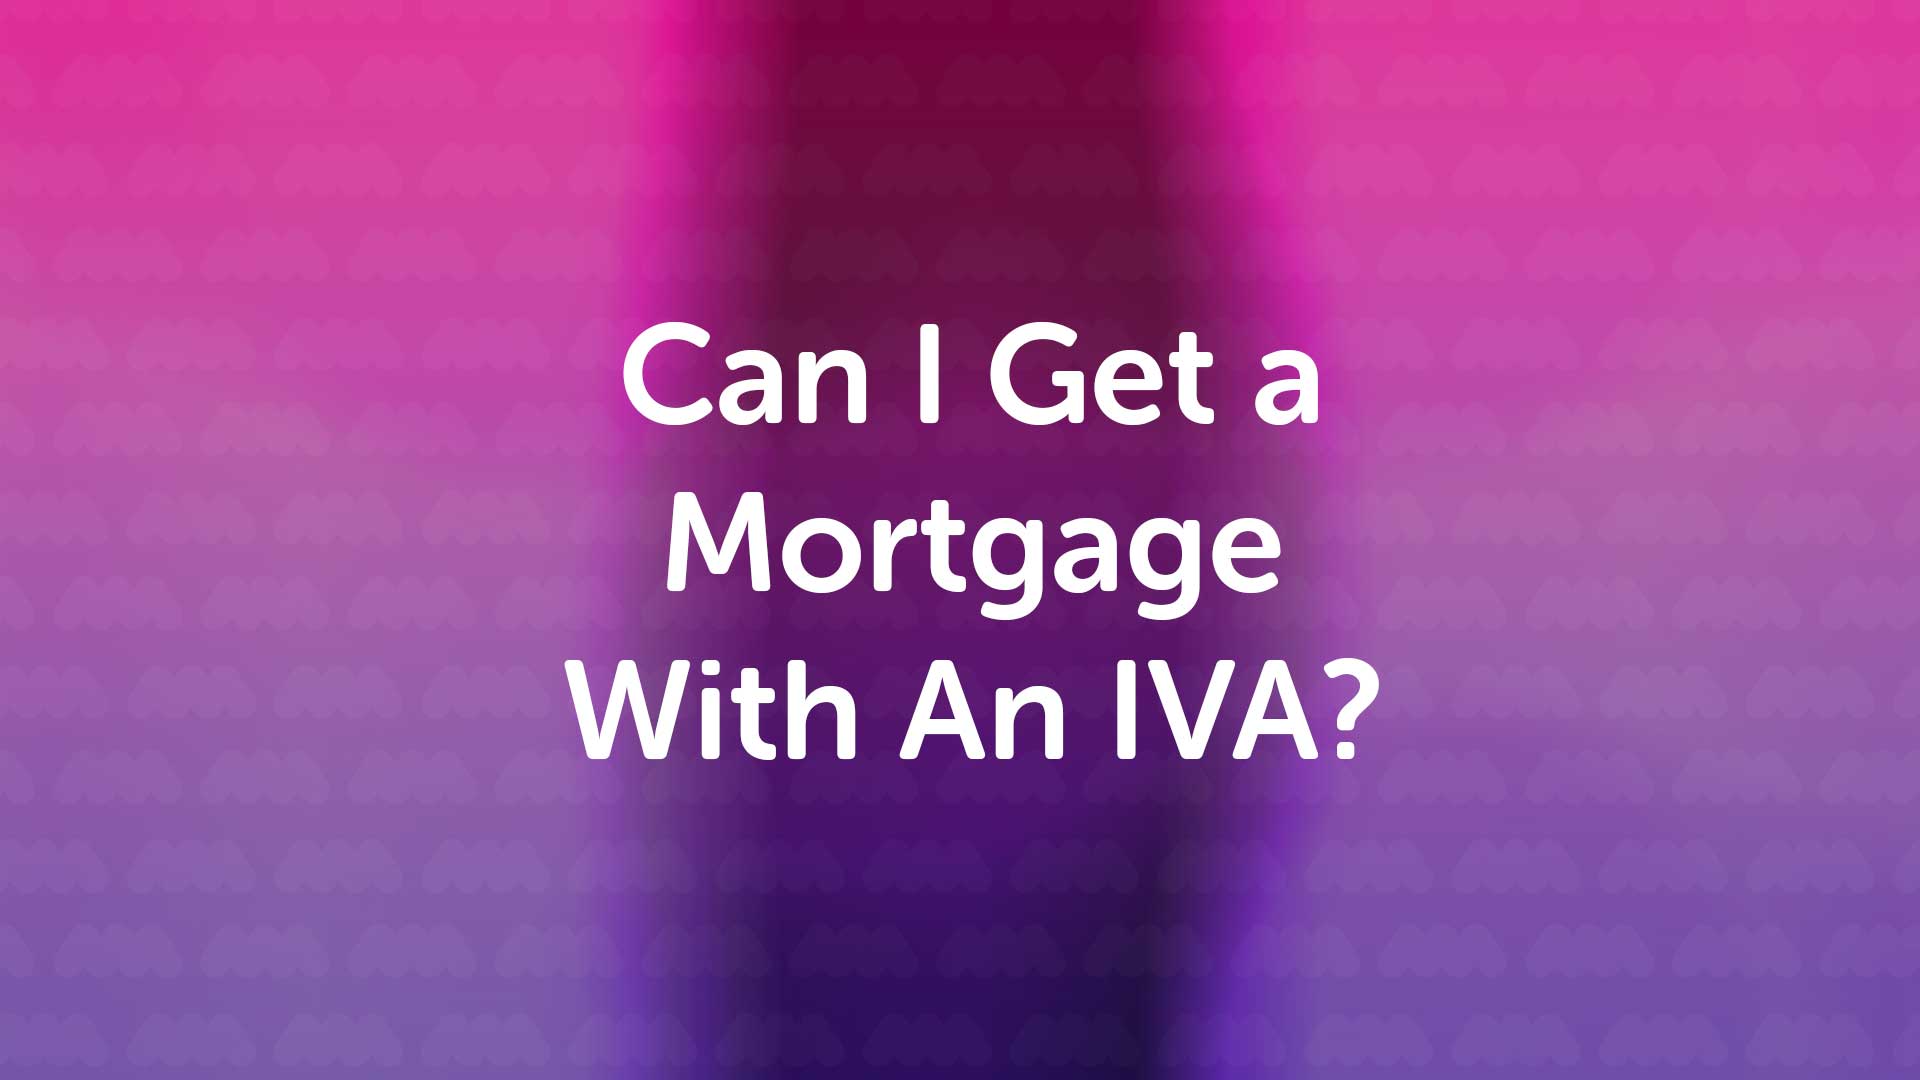 Mortgage With IVA in Sheffield